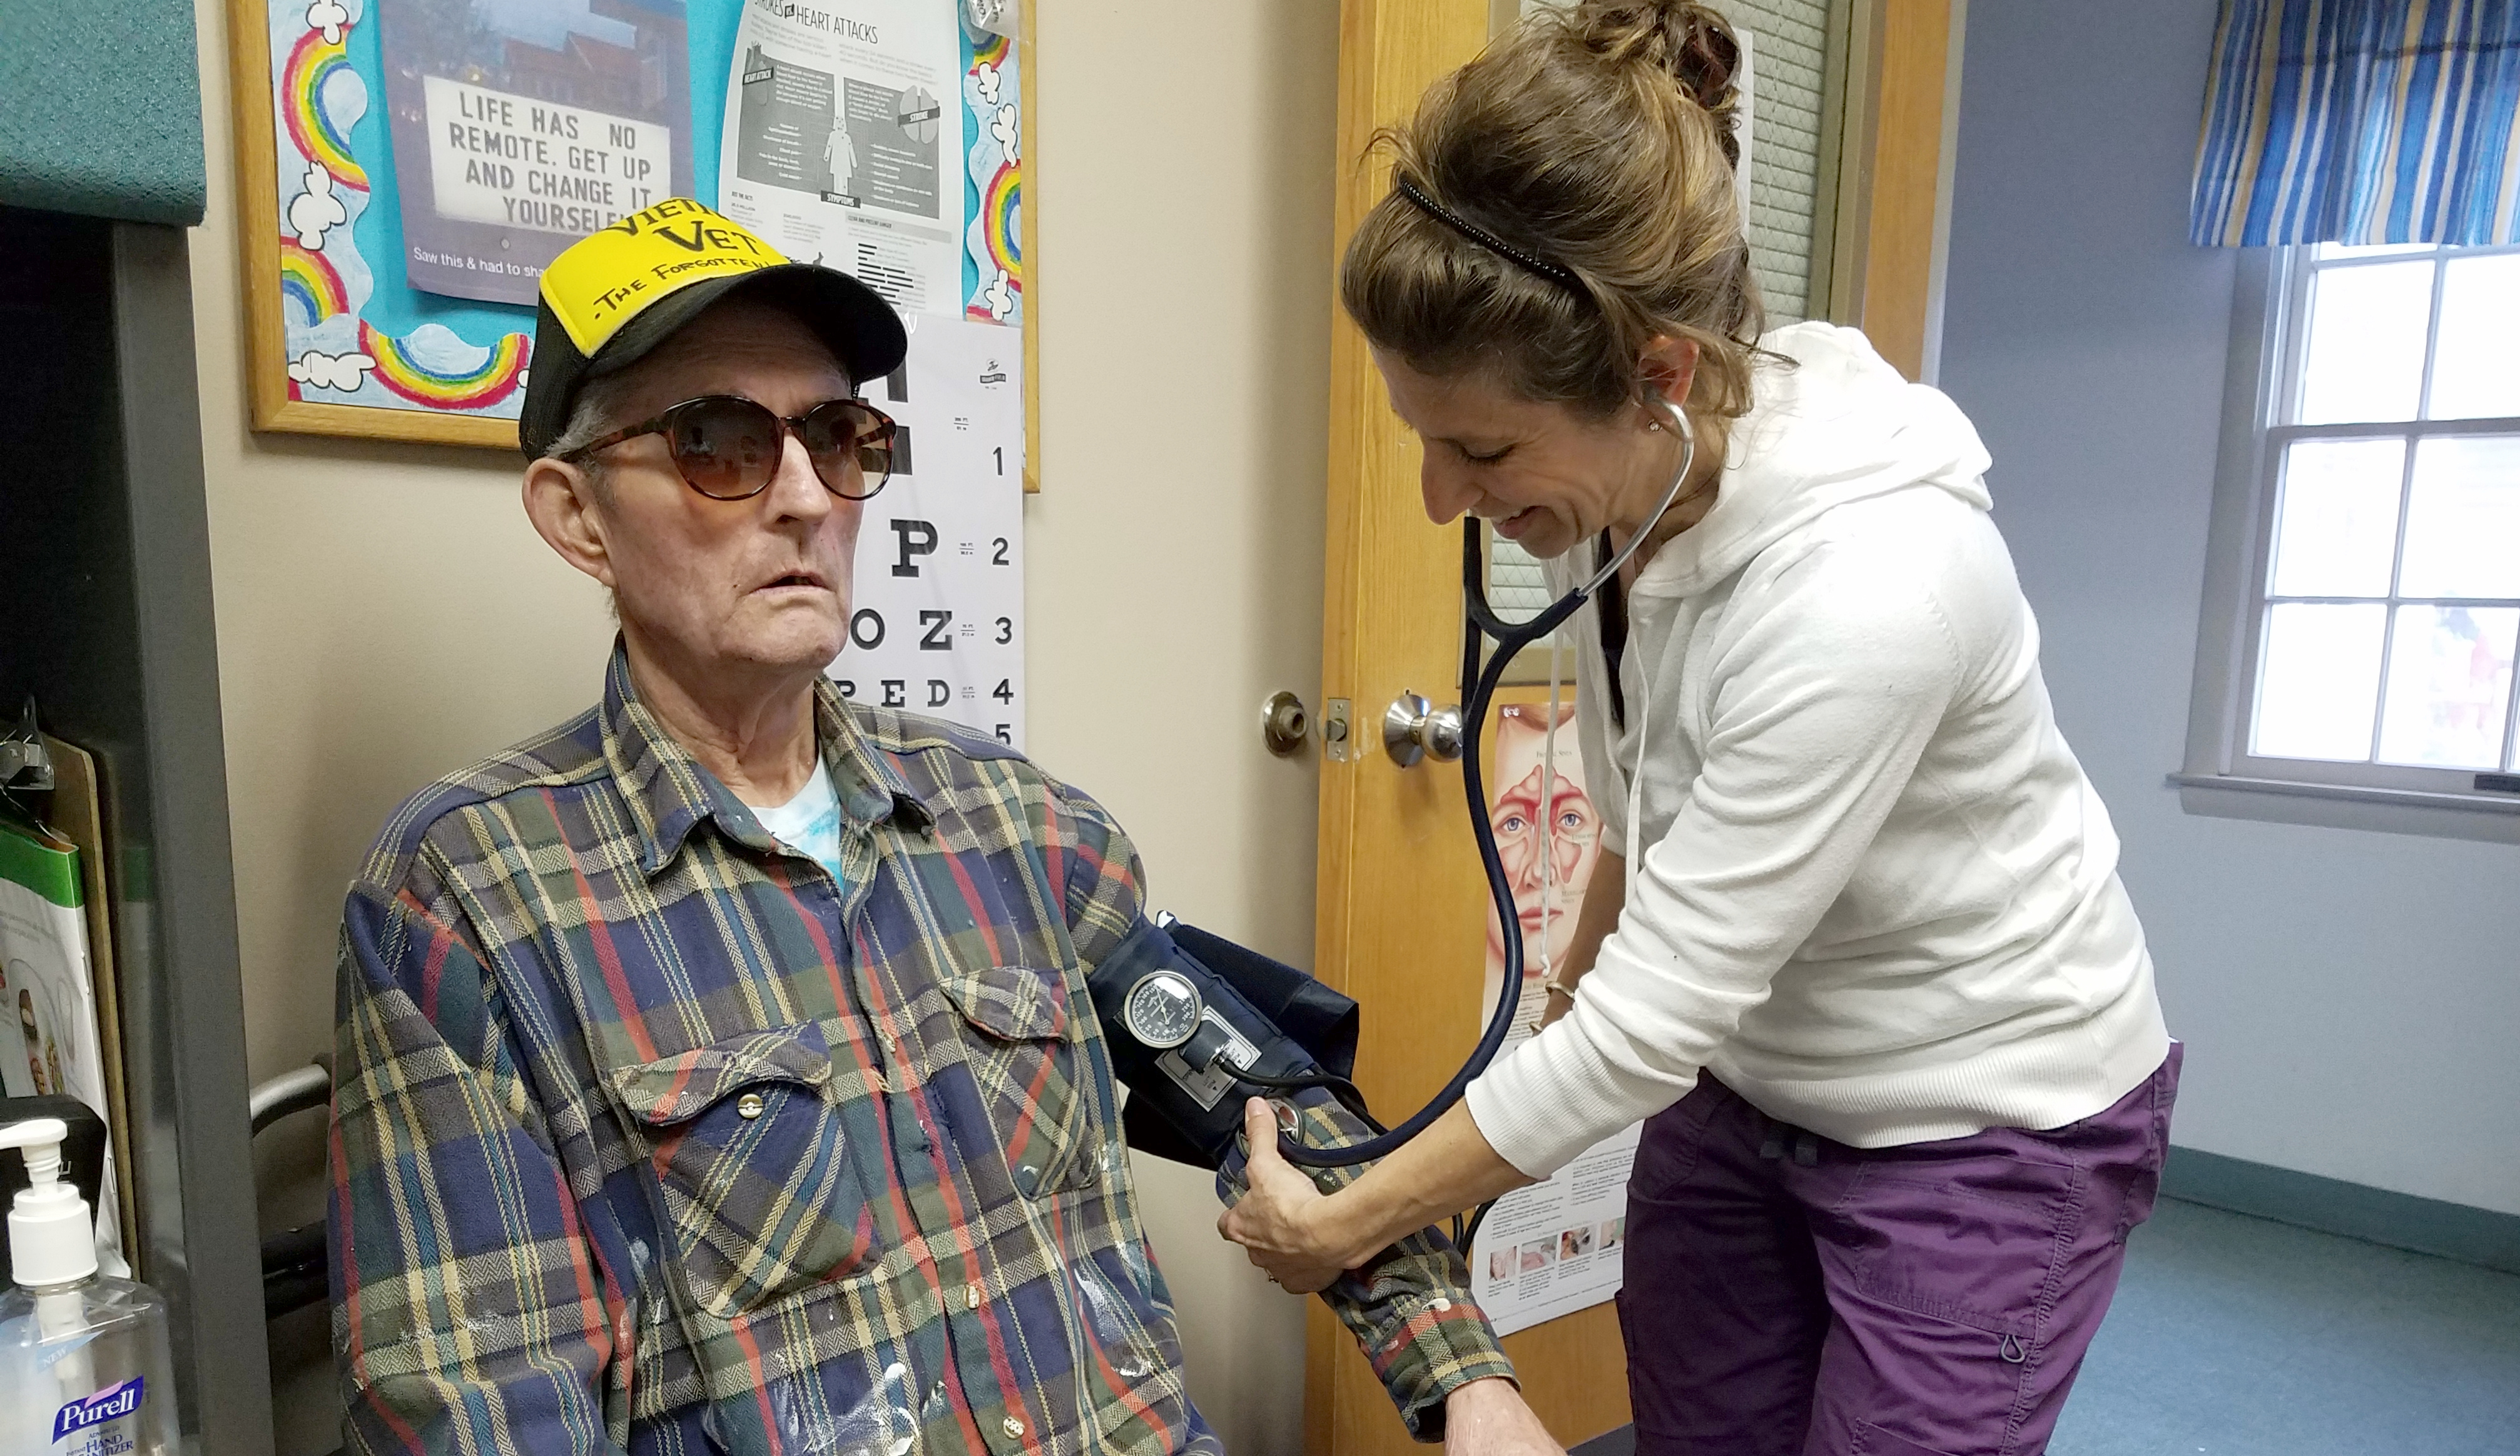 Healthcare provider taking patient's blood pressure